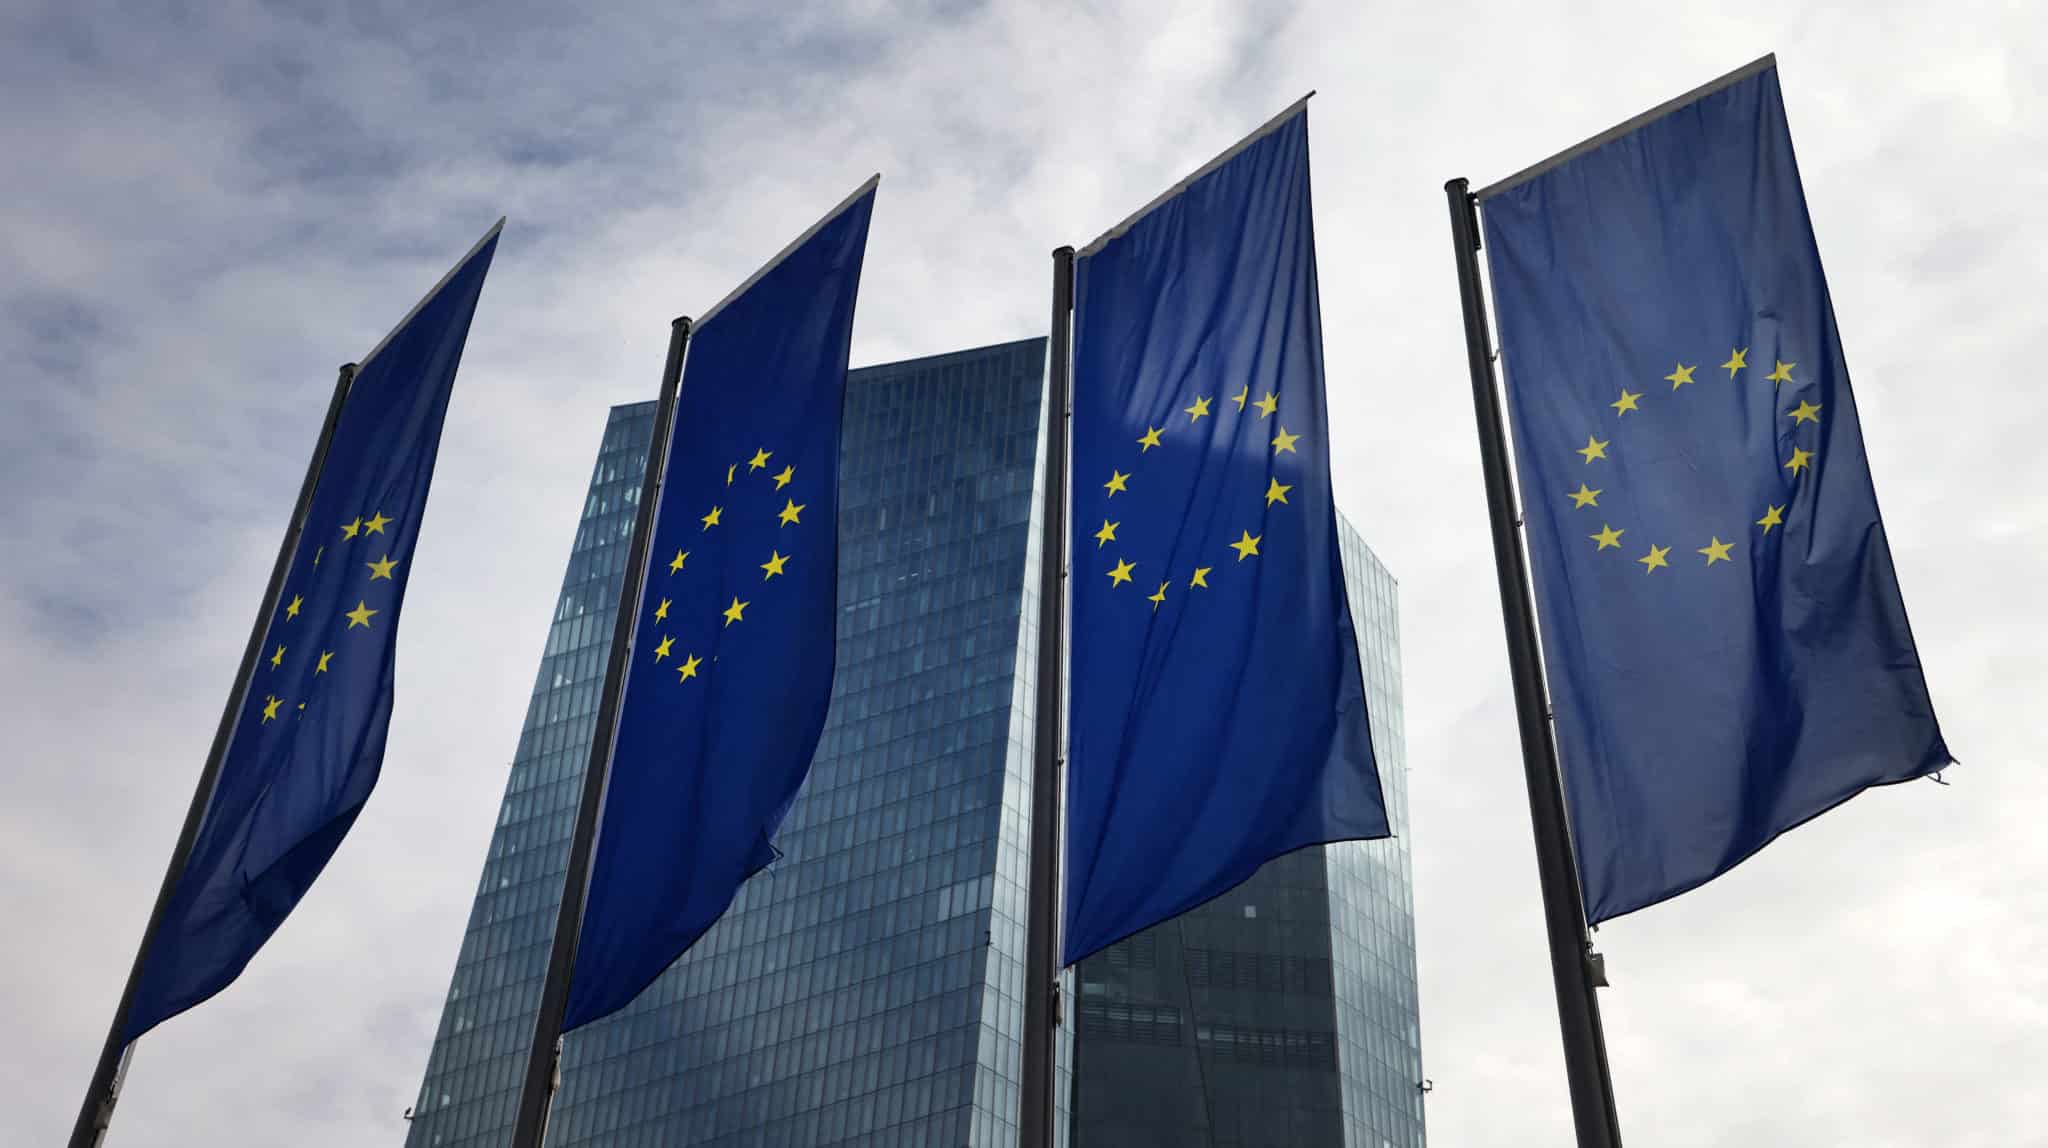 ECB must ‘carry on and act consistently’ with interest rate hikes, policymaker says